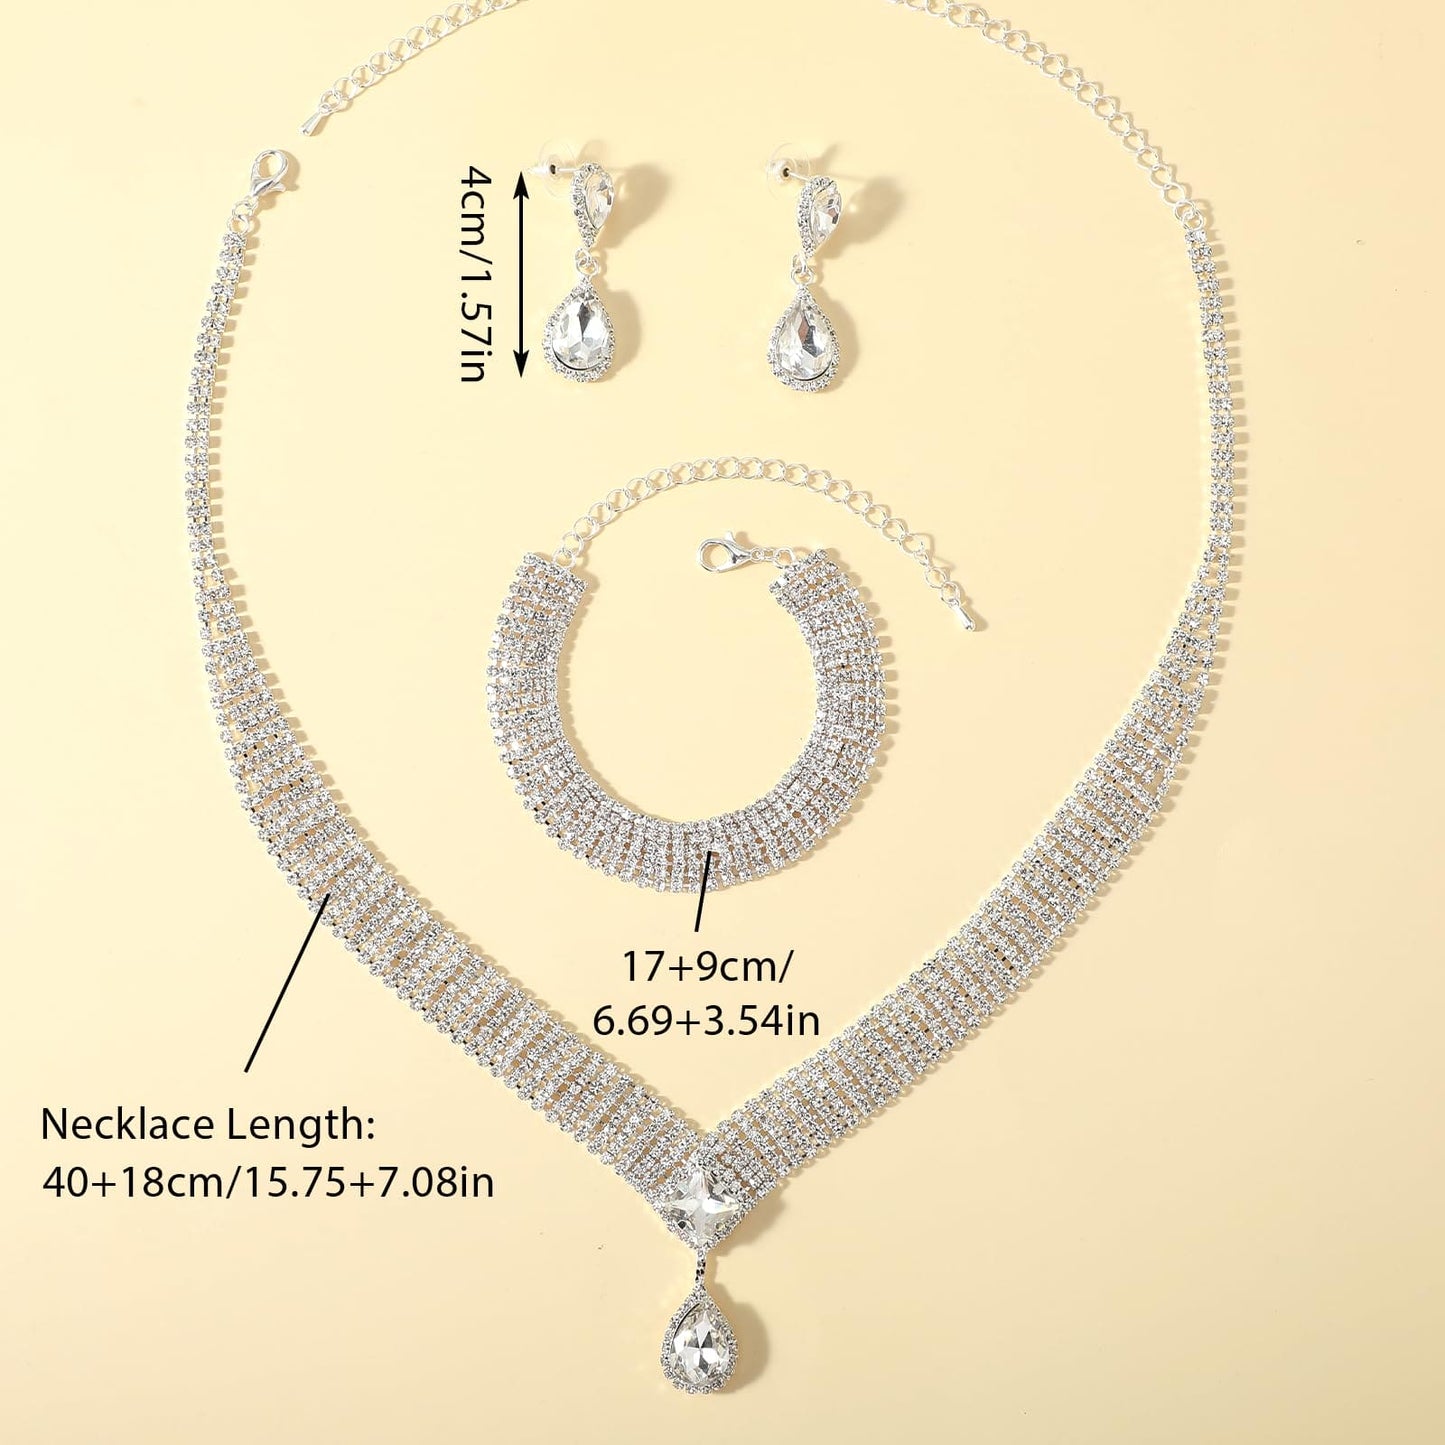 3 Pcs Silver Sparkly Jewelry Set Rhinestone Necklace and Bracelet Set Crystal Necklace Bracelet Teardrop Earrings Sets for Bridal Bridesmaid Formal Wedding Dainty Sparkly Necklaces for Women